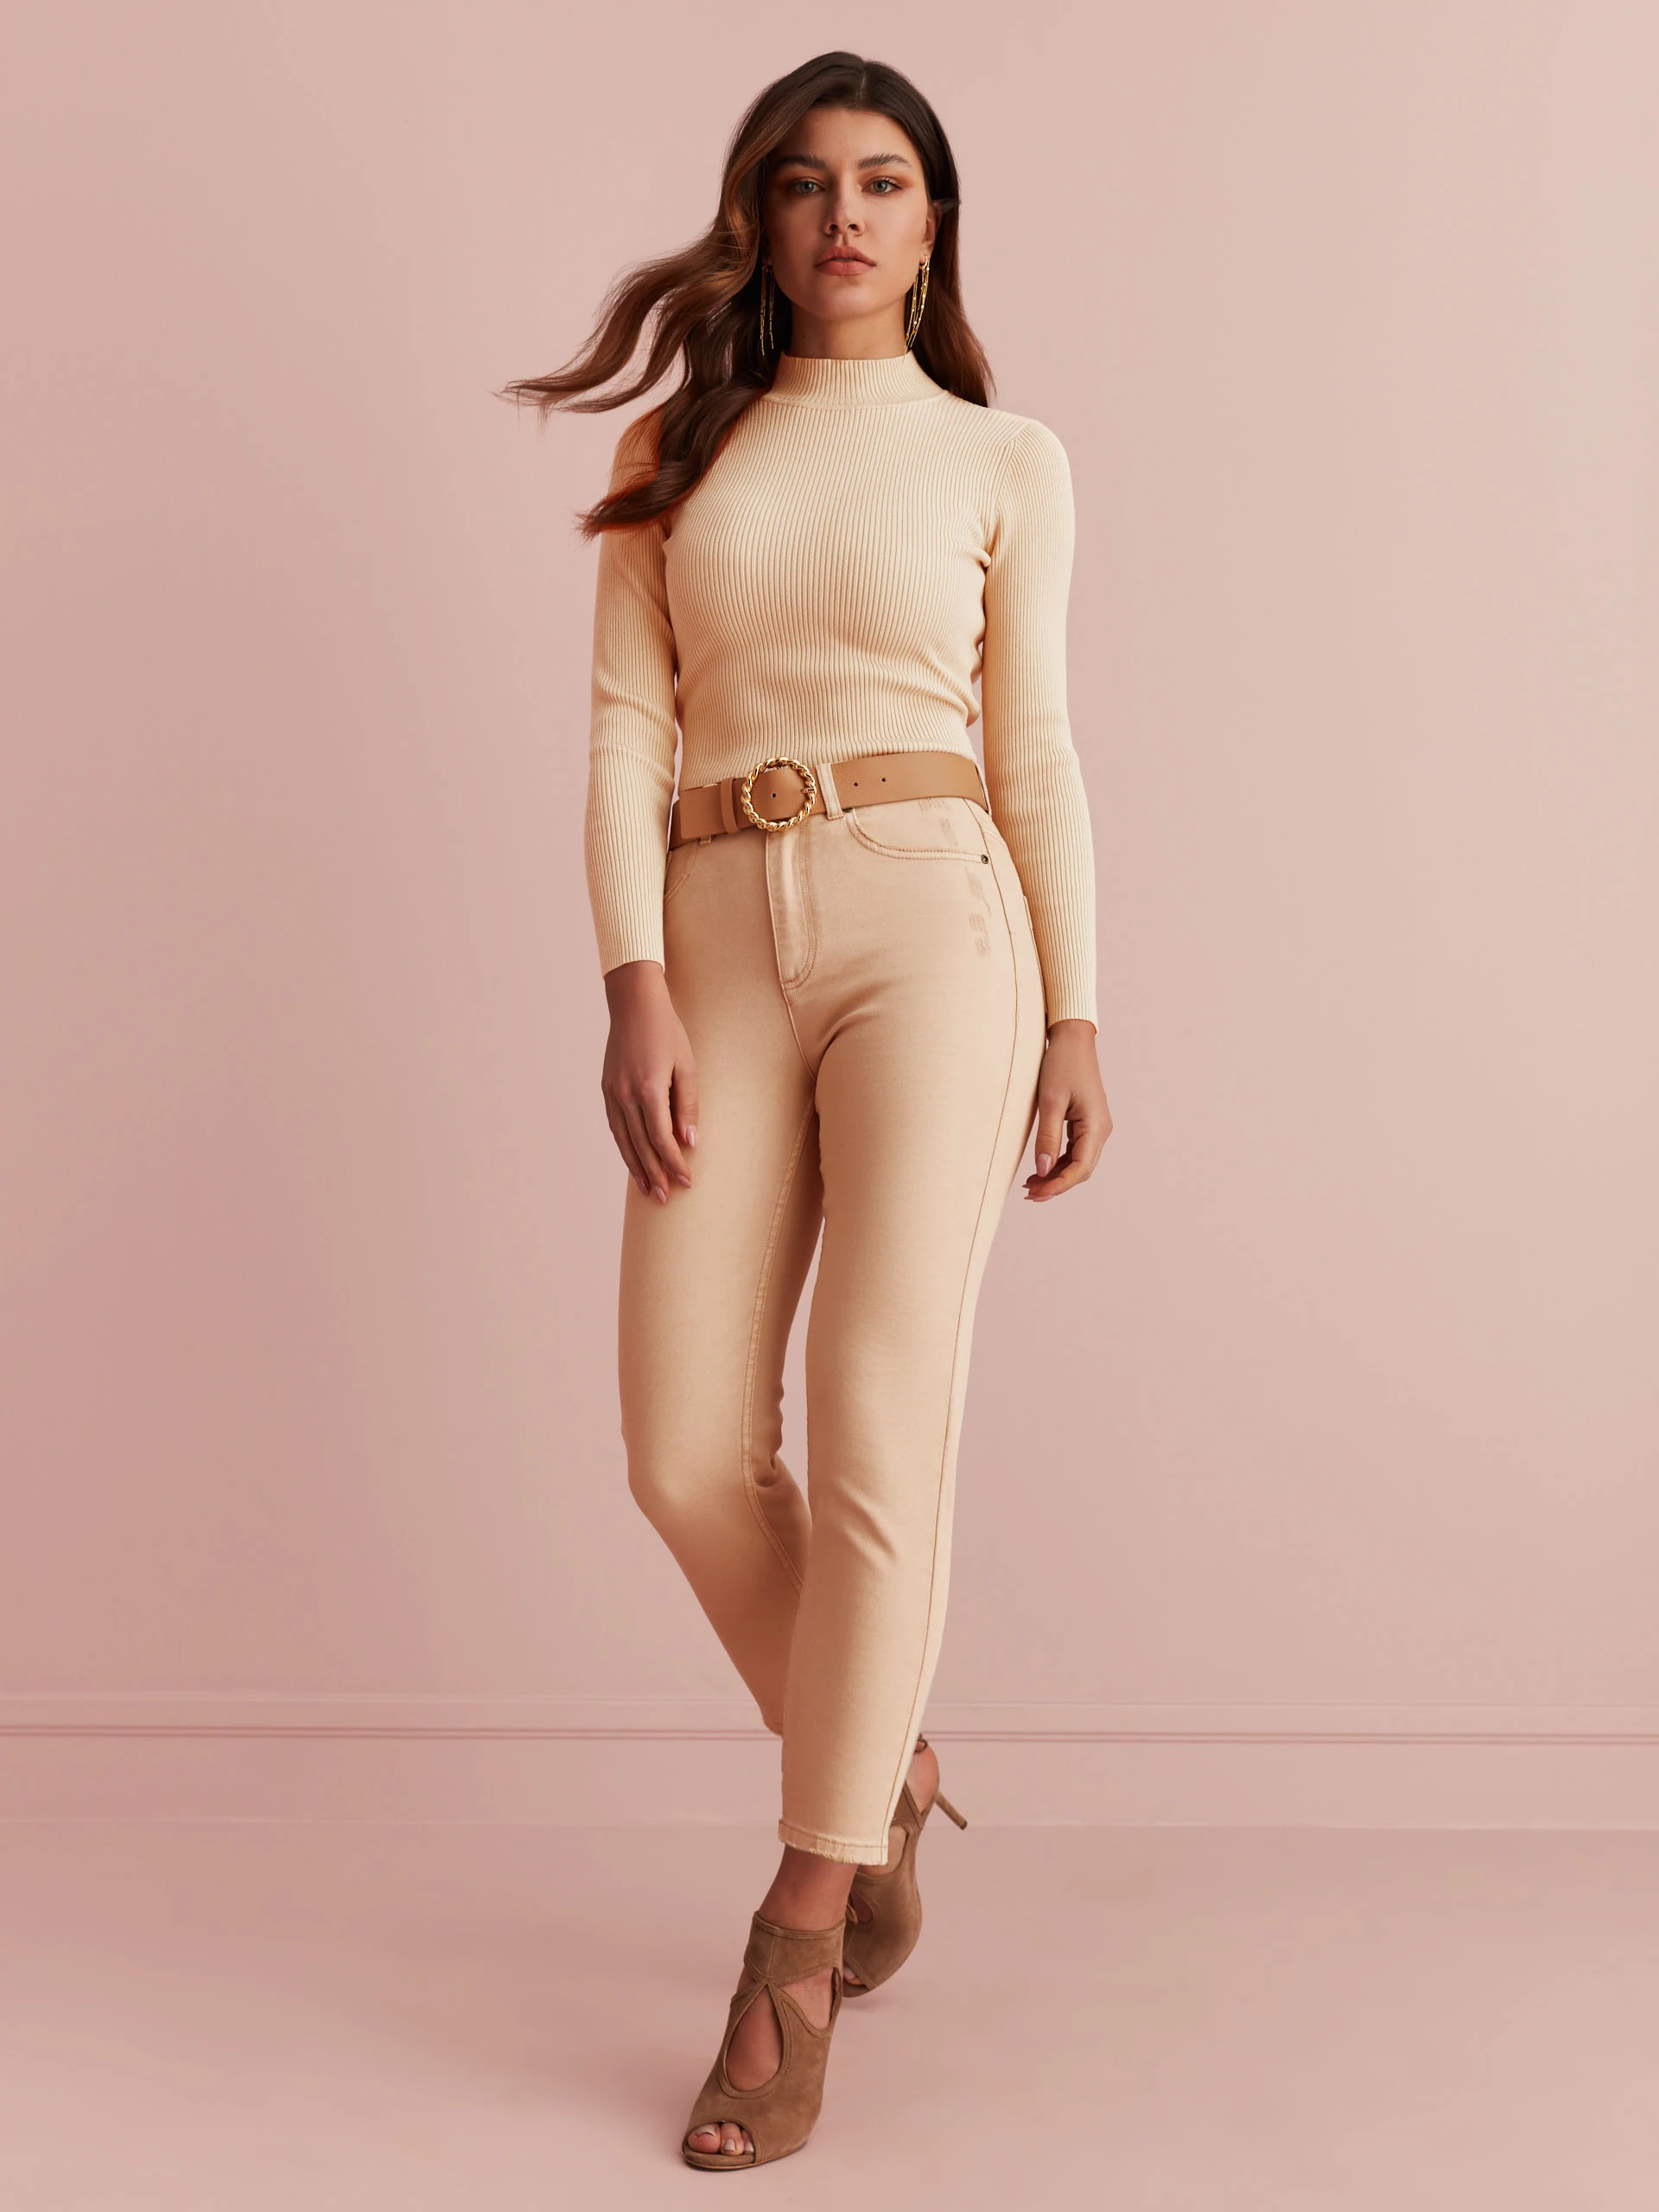 BEIGE HIGH-WAISTED JEANS